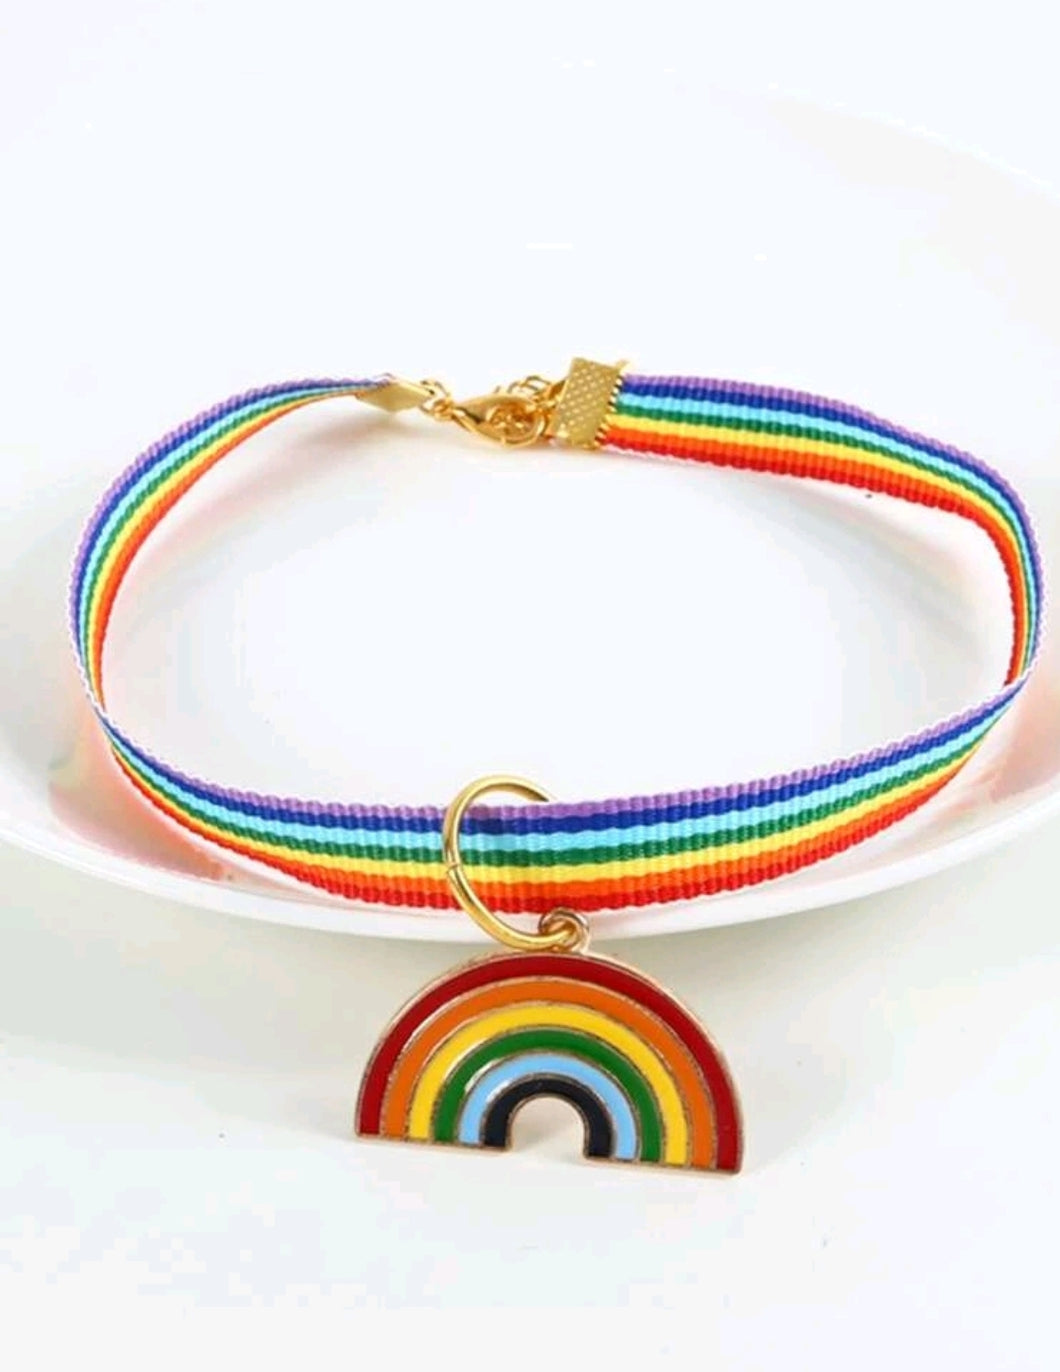 'Cat Rainbow Striped Collar' A trendy superstar cat collar! Your cat-friend will be really trendy with this pet accessory with rainbow pendant. Color: Multicolor Pattern Type: Rainbow Stripe Applicable Pet: Cat/Dog Material: Polyester Size: Neck 25-30cm / 9.8-1.8inch